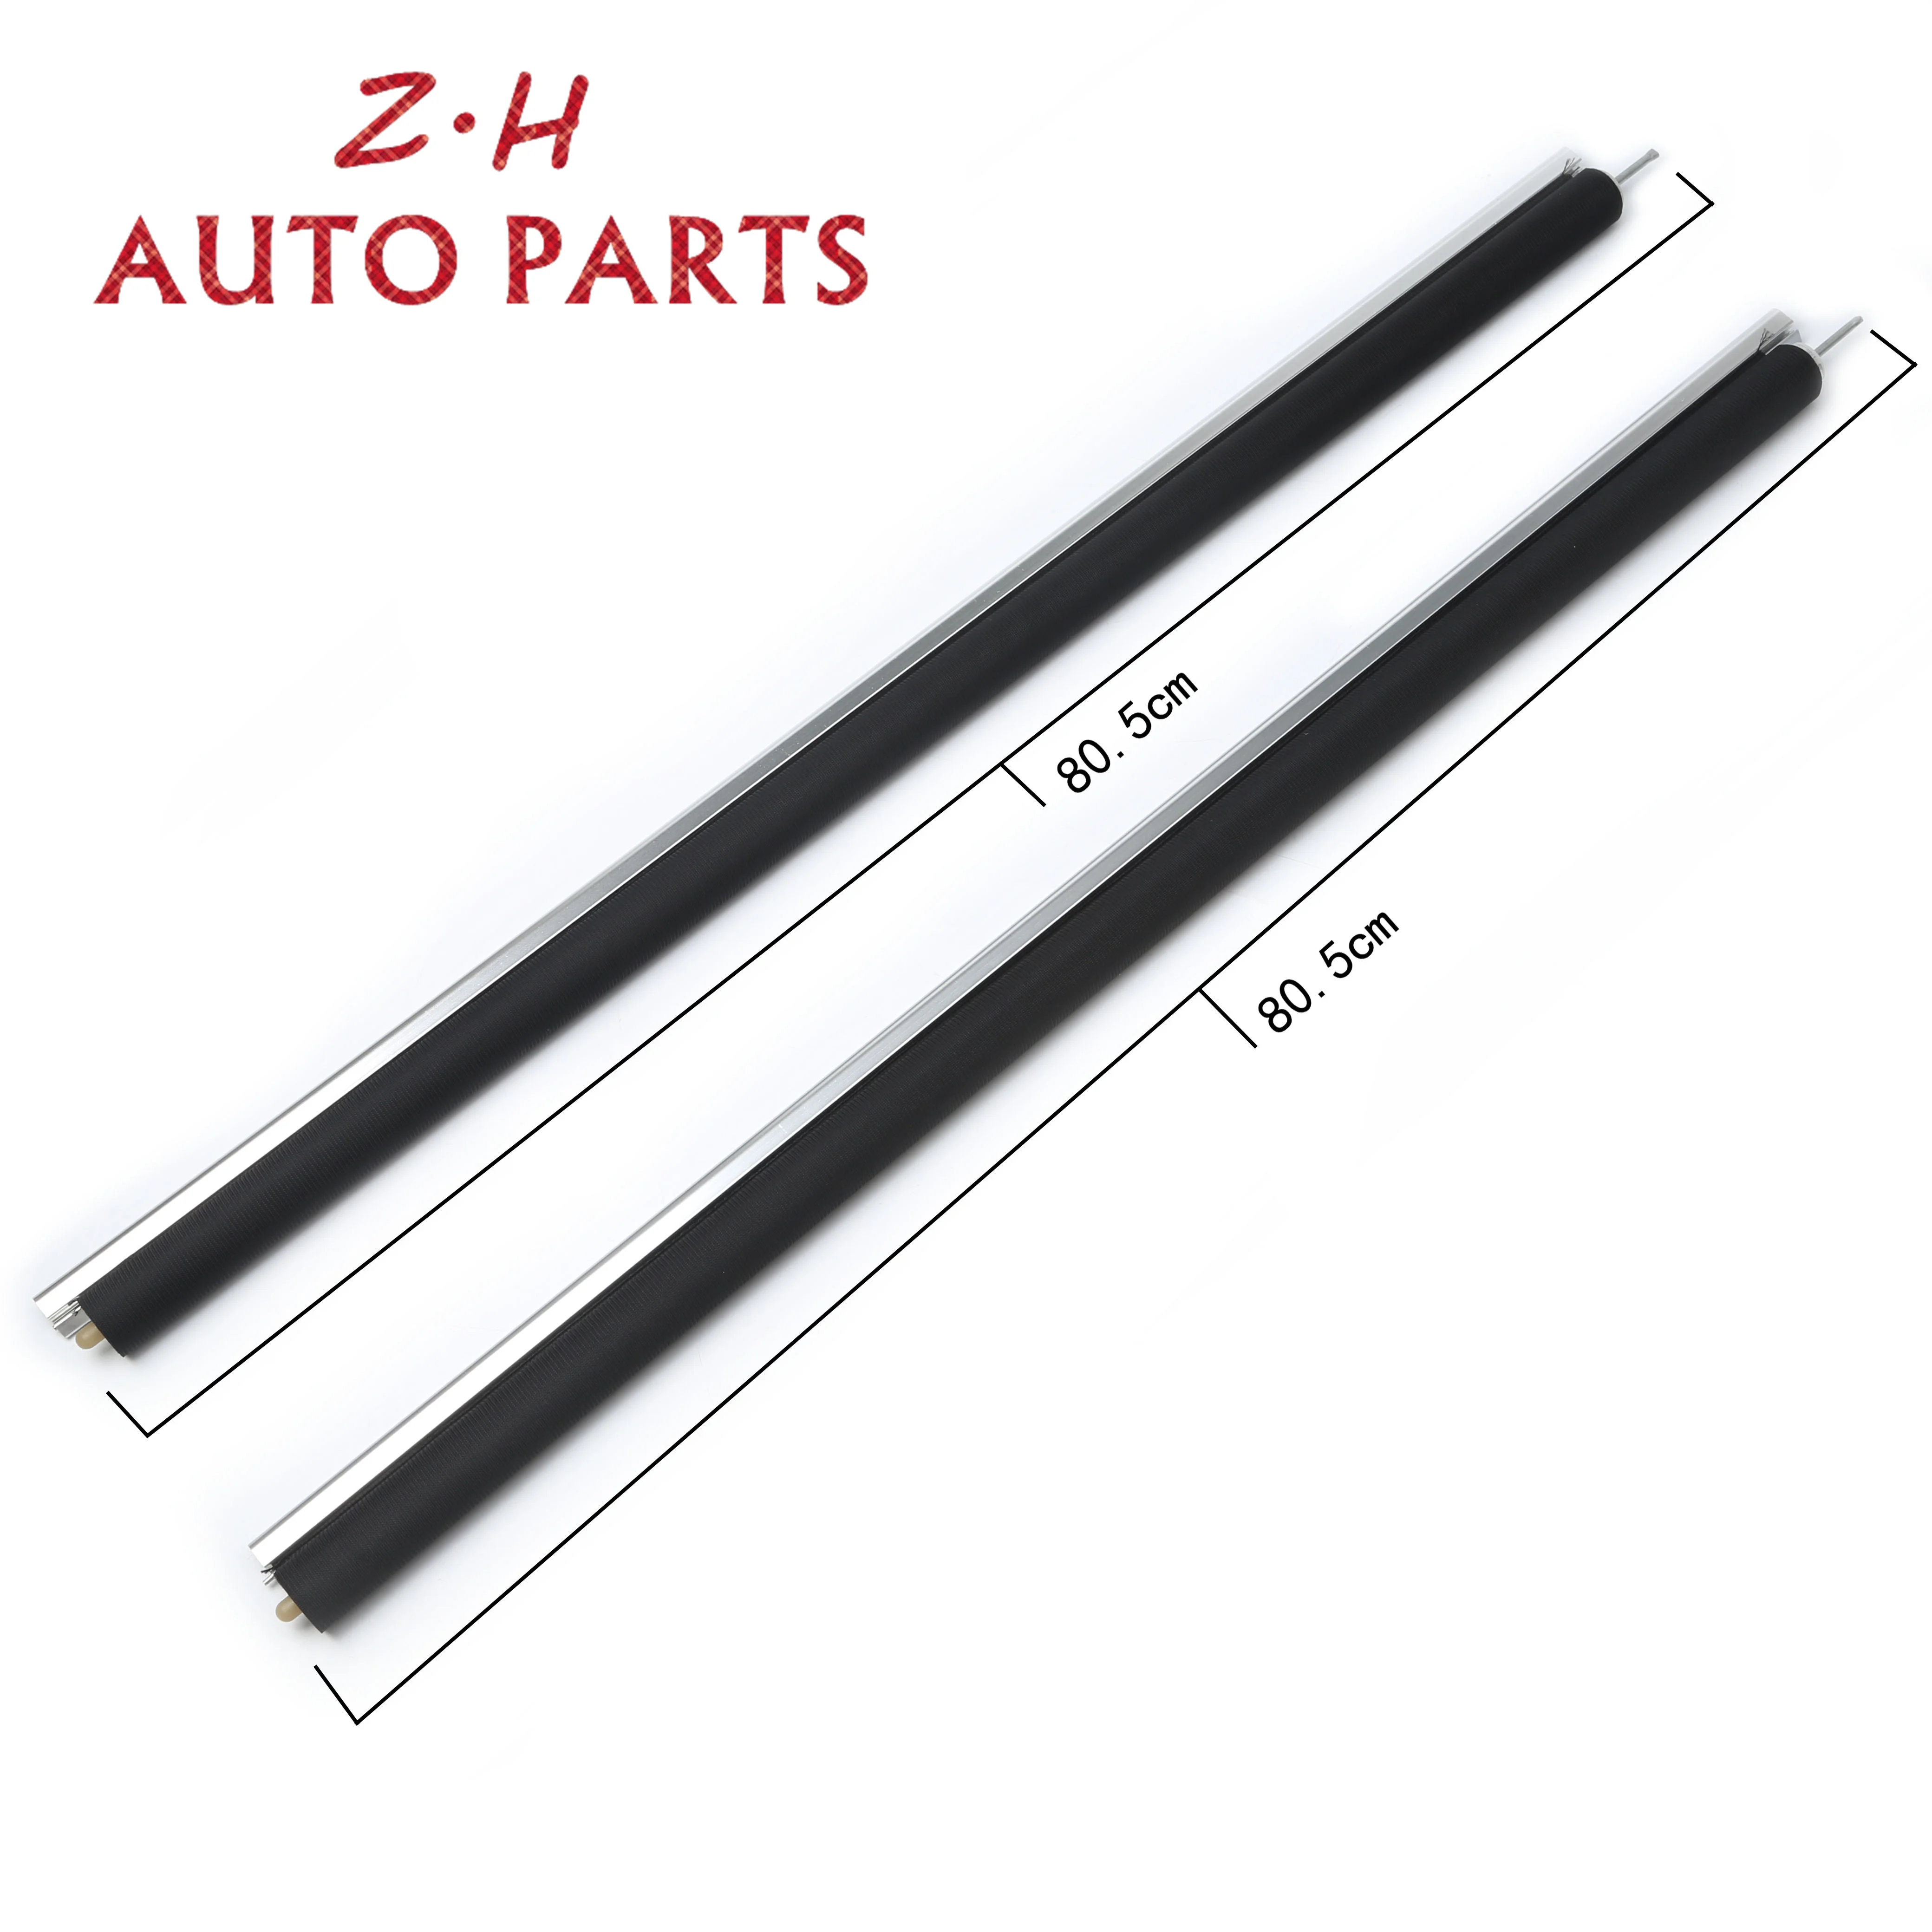 

New A Pair Of Sunroof Roller Shutter Assembly For Mercedes-Benz W246 2012-2019 W204 S204 X204 204 780 01 40 7K66 A20478001409F67